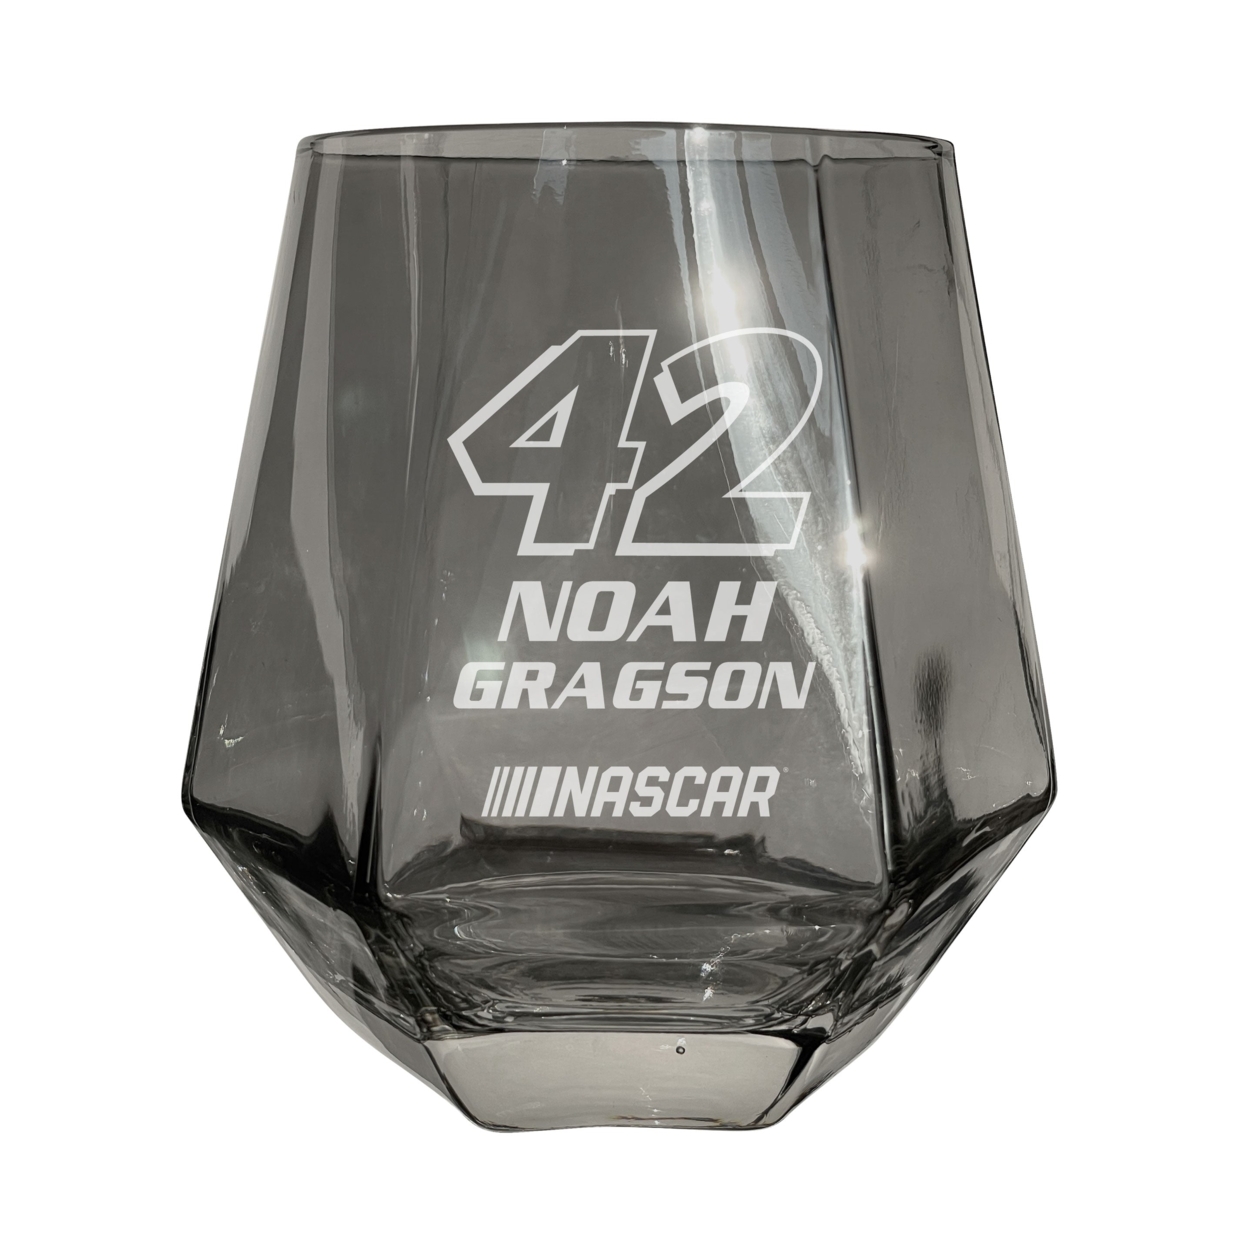 #42 Noah Gragson Officially Licensed 10 Oz Engraved Diamond Wine Glass - Clear, 2-Pack